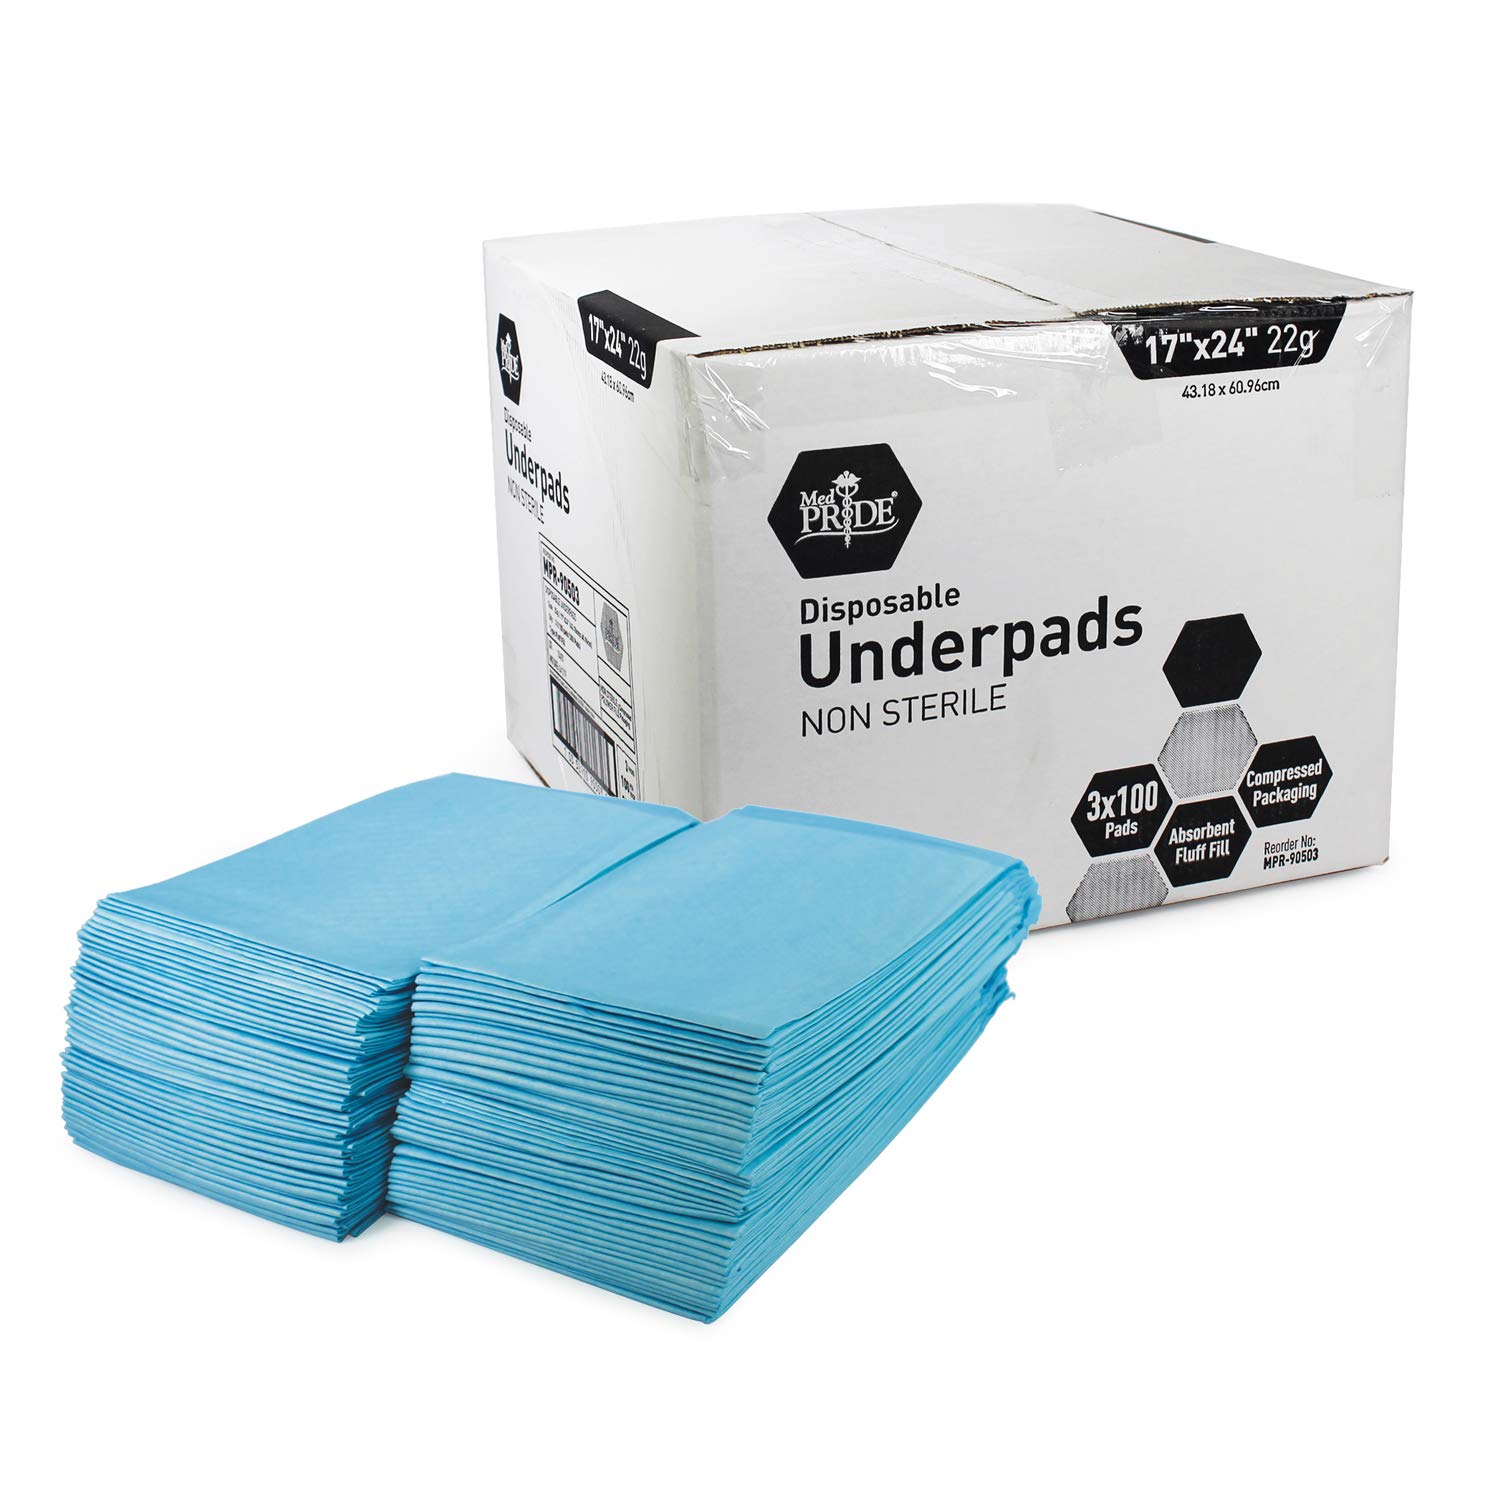 Assurance Adult Diapers & Underpads for Sale in Orlando, FL